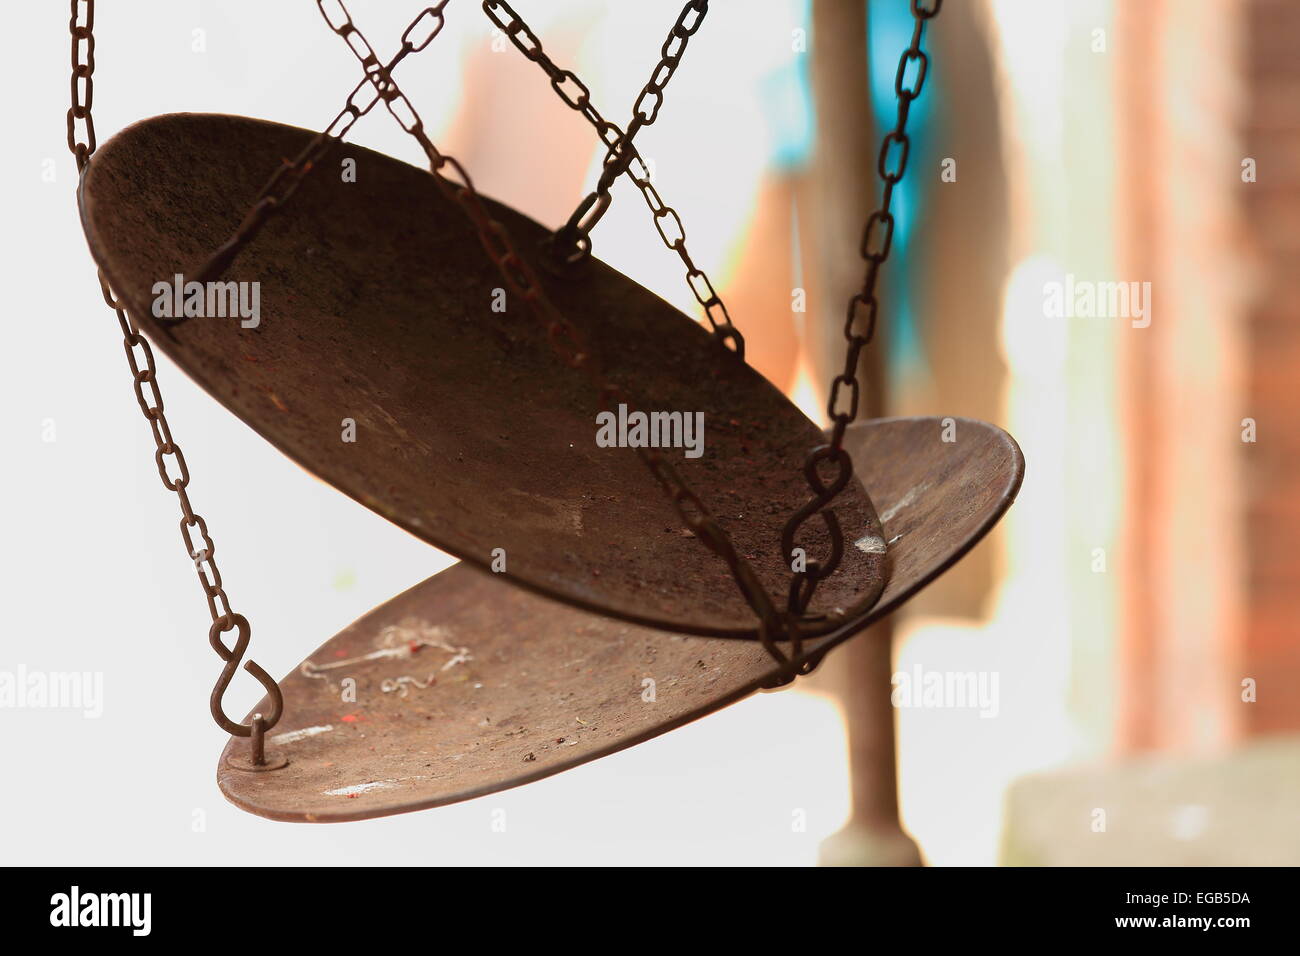 Hanging Weight Scale with Chain and Empty Dish. 3d Rendering Stock Photo by  ©doomu 189467016